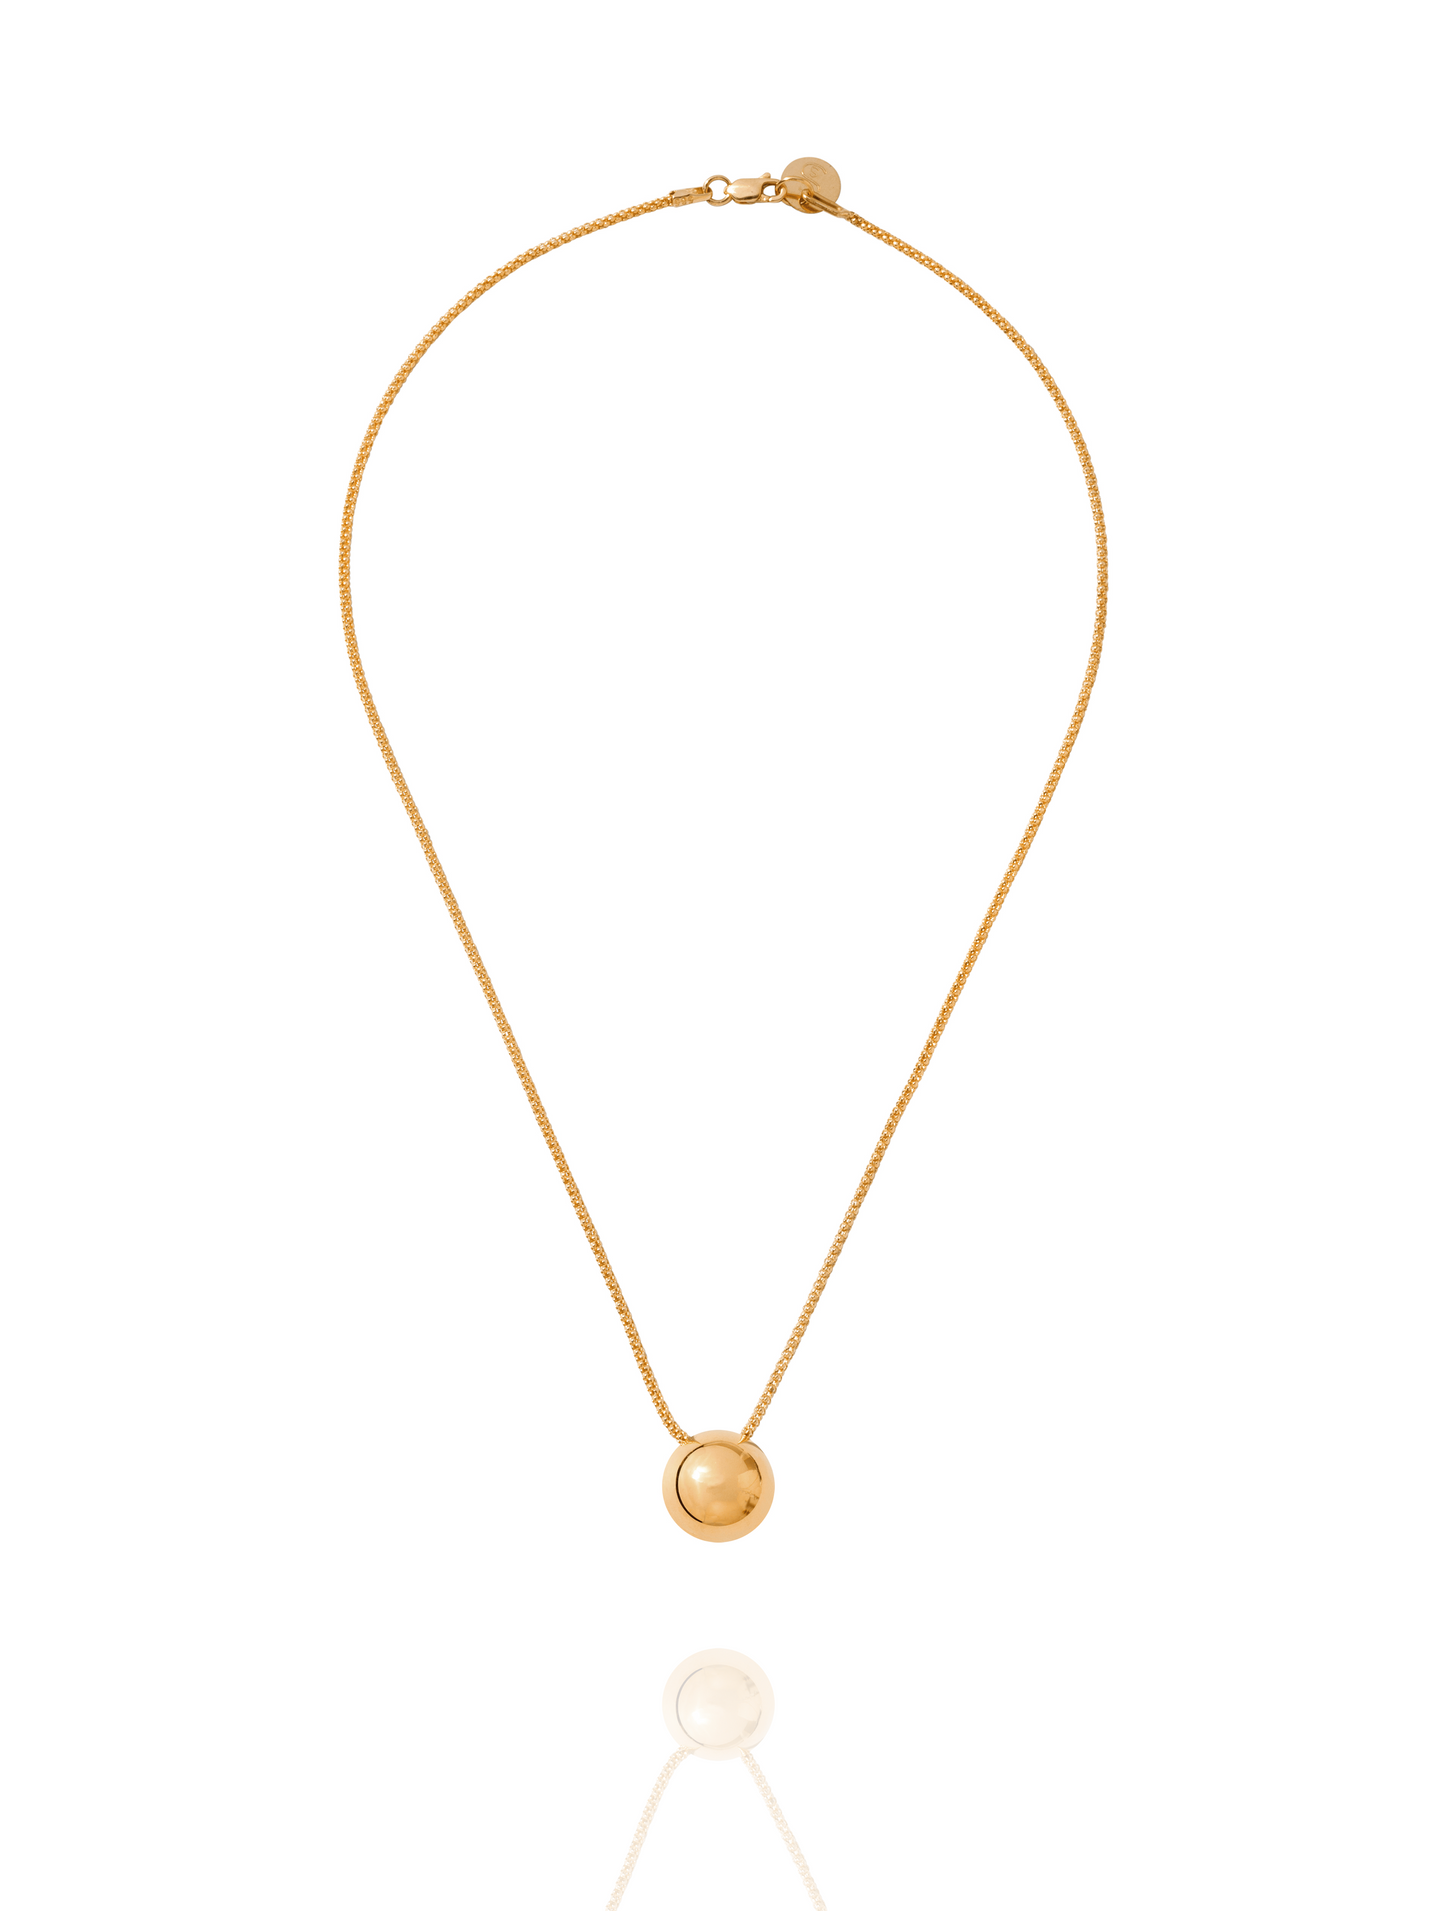 Solid 14k Gold Soul Sphere Necklace full view